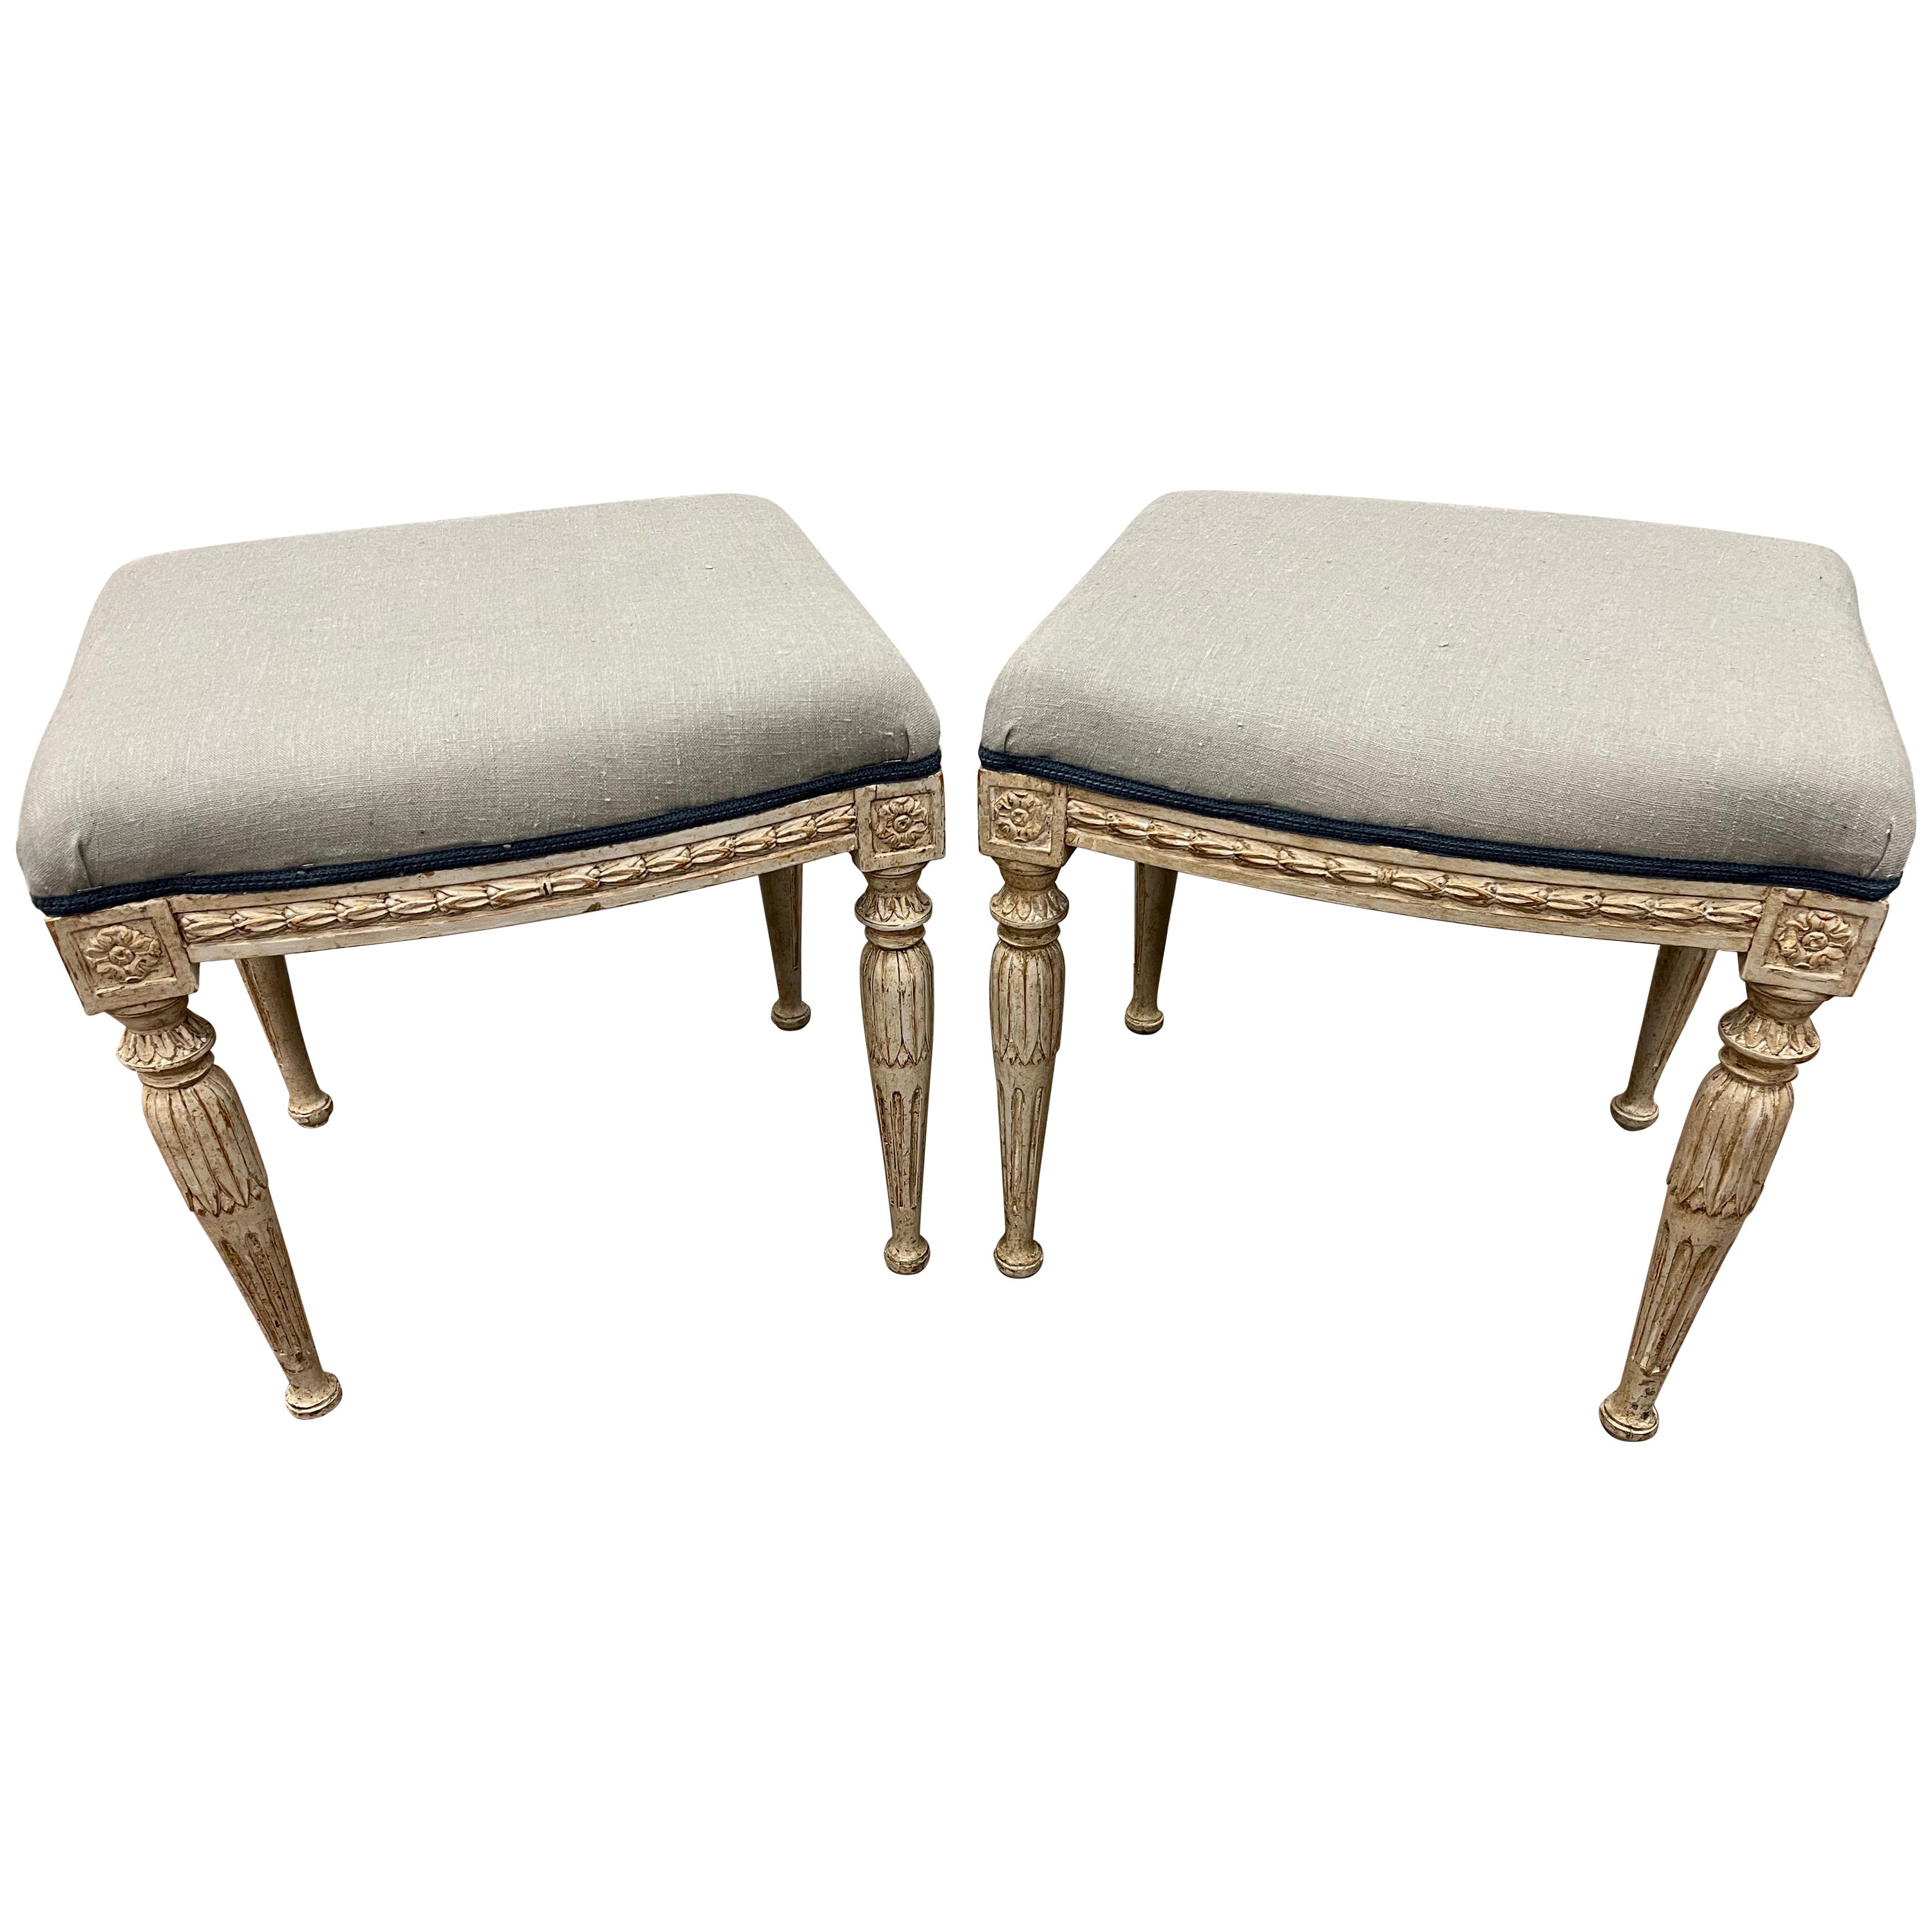 Pair of 19th Century Swedish Late Gustavian Footstools For Sale